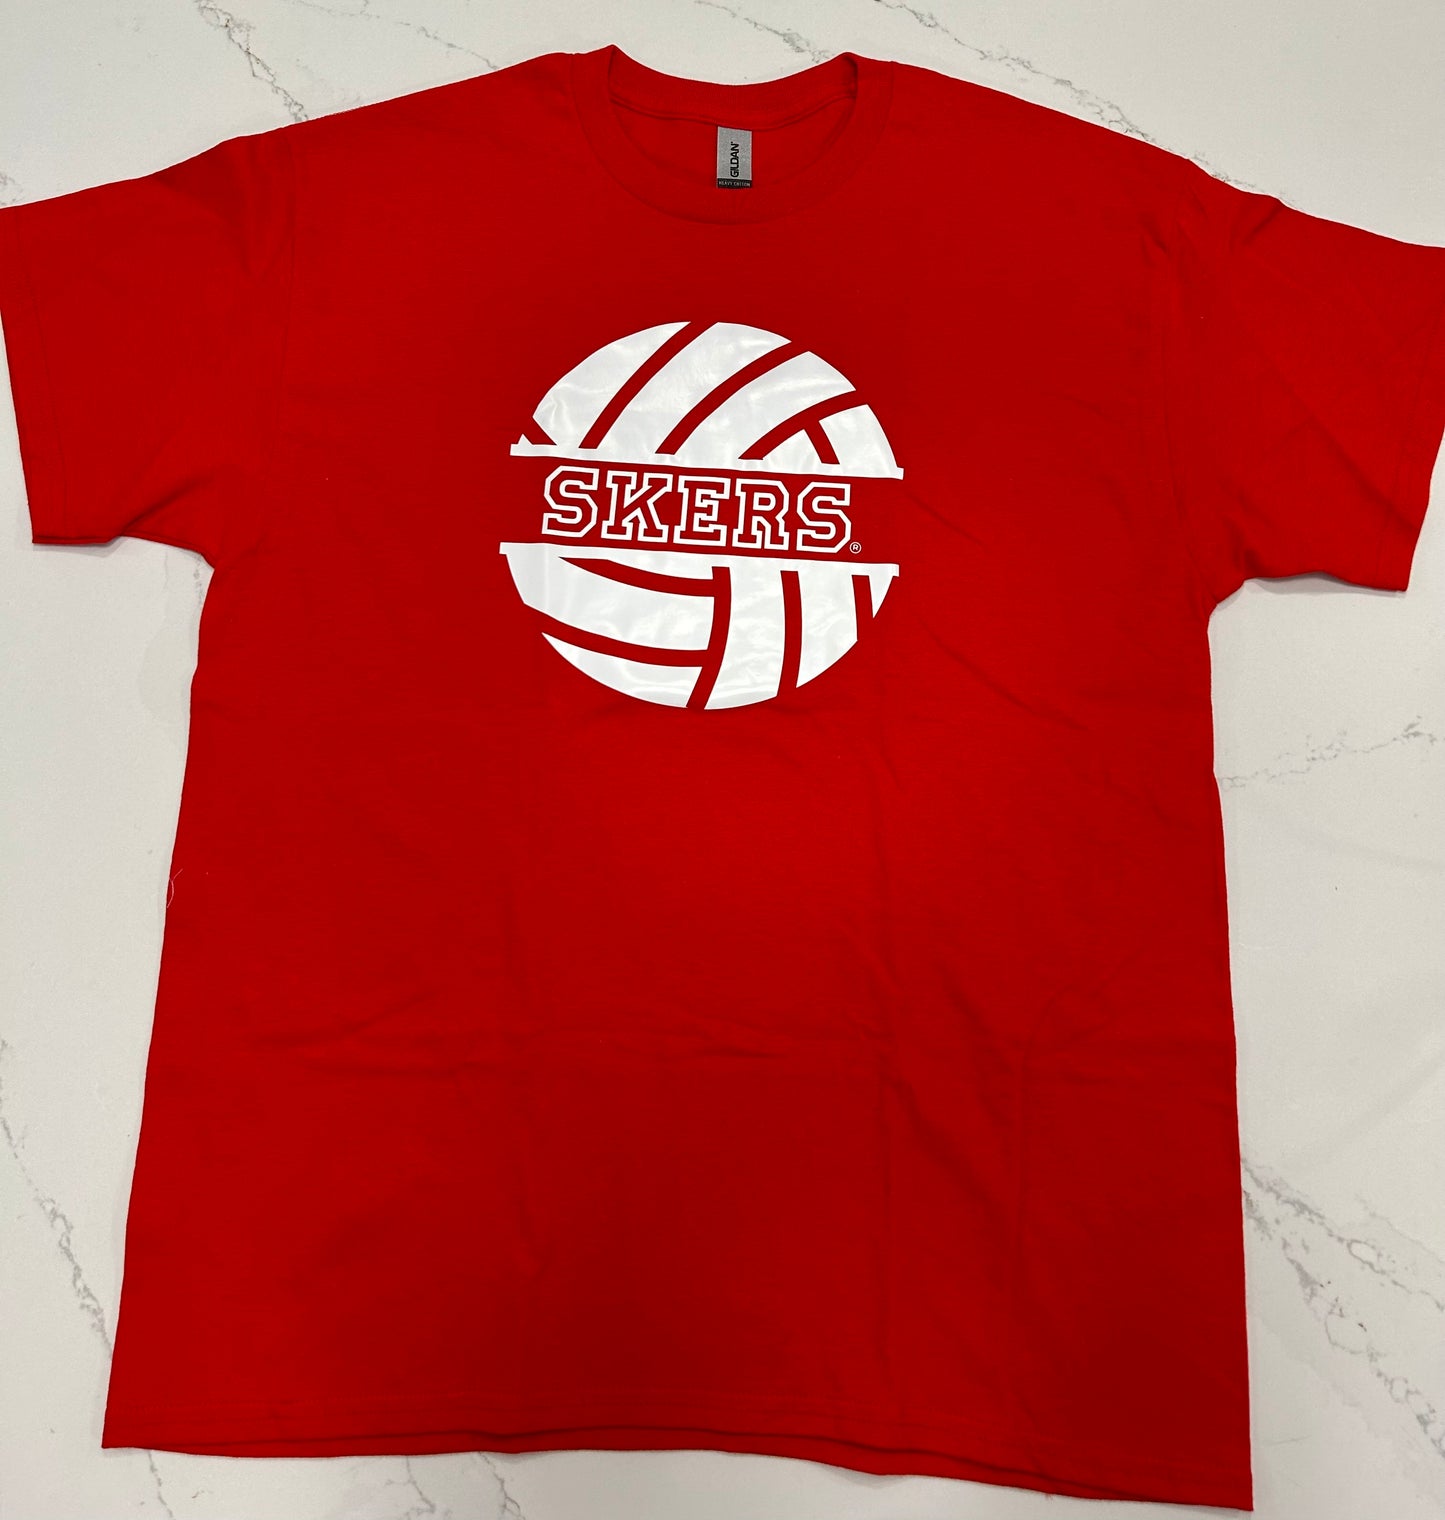 Skers Volleyball Red Unisex - Short Sleeve Shirt